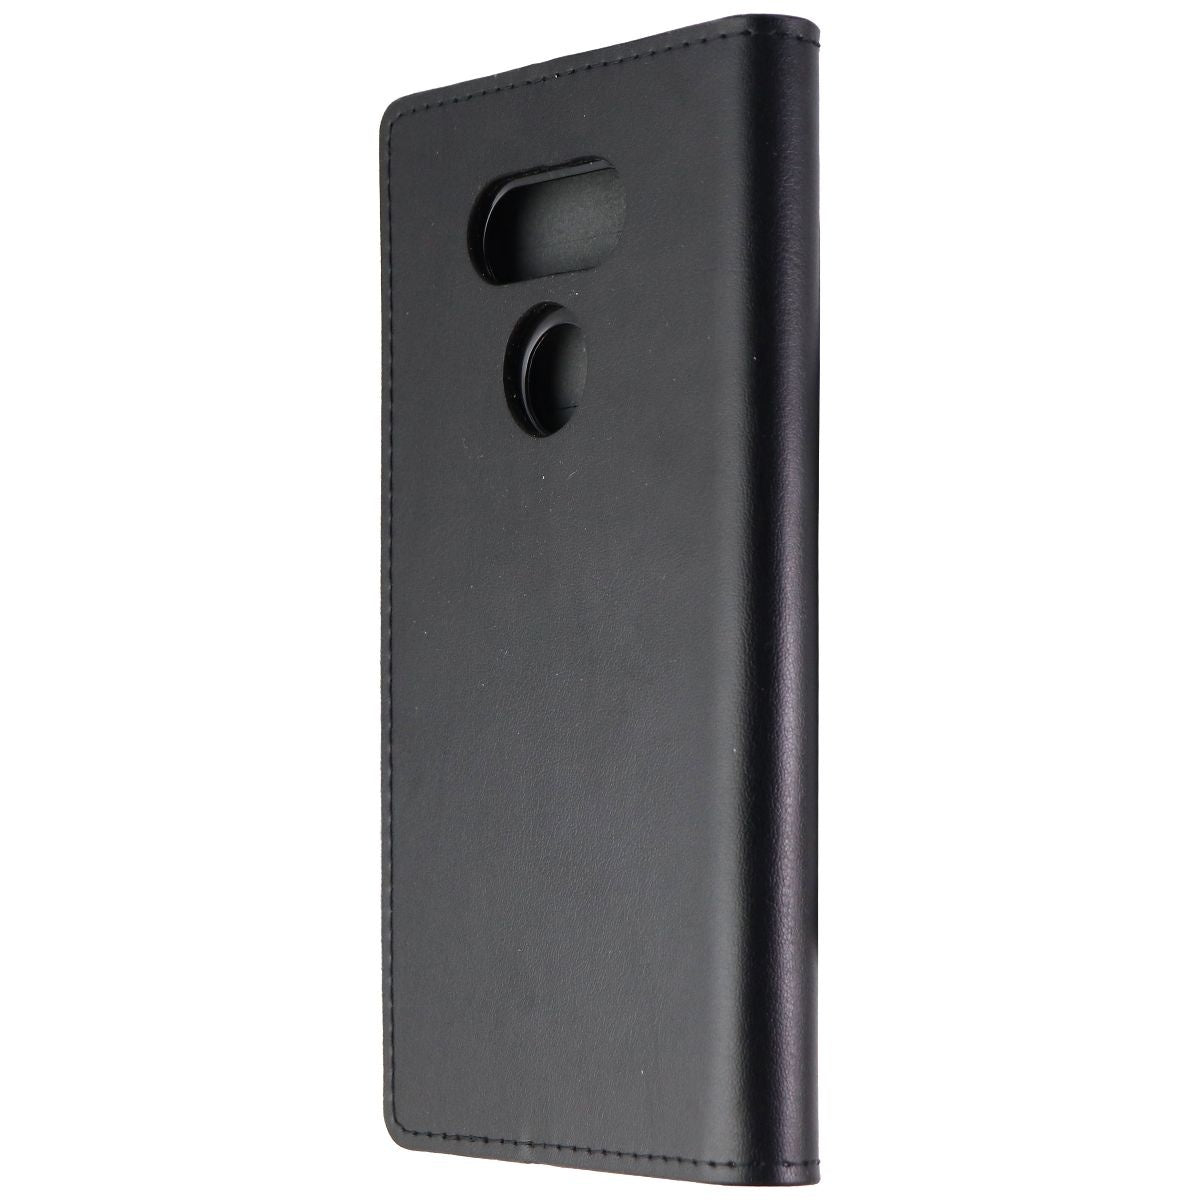 Avoca MobilePro Folio Wallet Case for LG G5 Smartphone - Black Cell Phone - Cases, Covers & Skins Avoca    - Simple Cell Bulk Wholesale Pricing - USA Seller